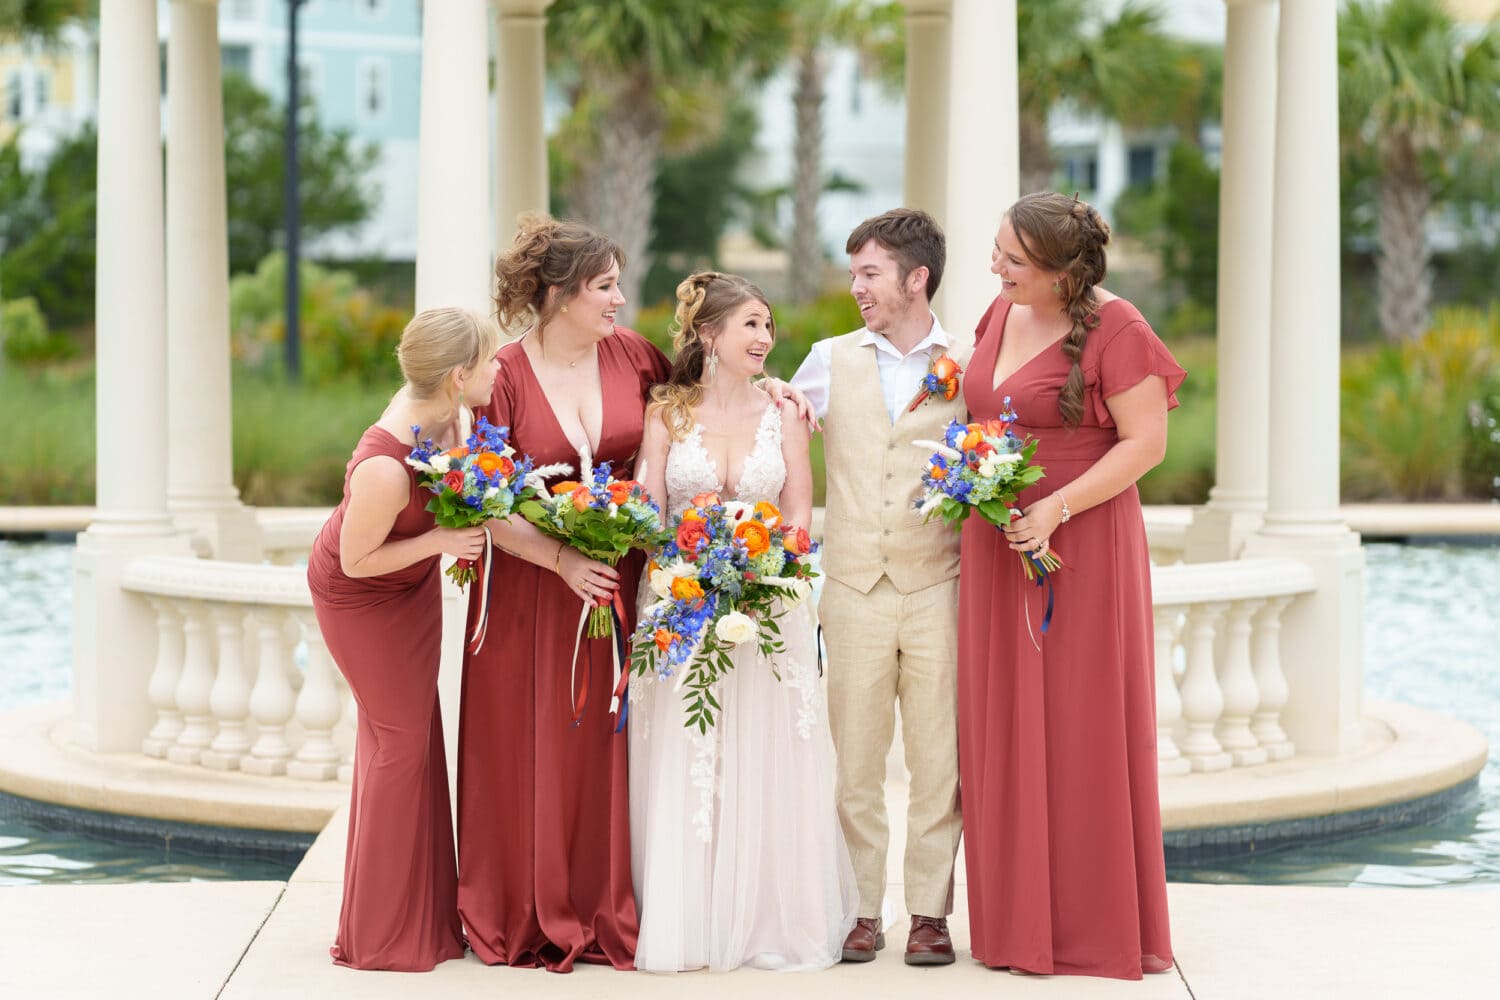 Bride with her bridesmaids - 21 Main Events - North Myrtle Beach